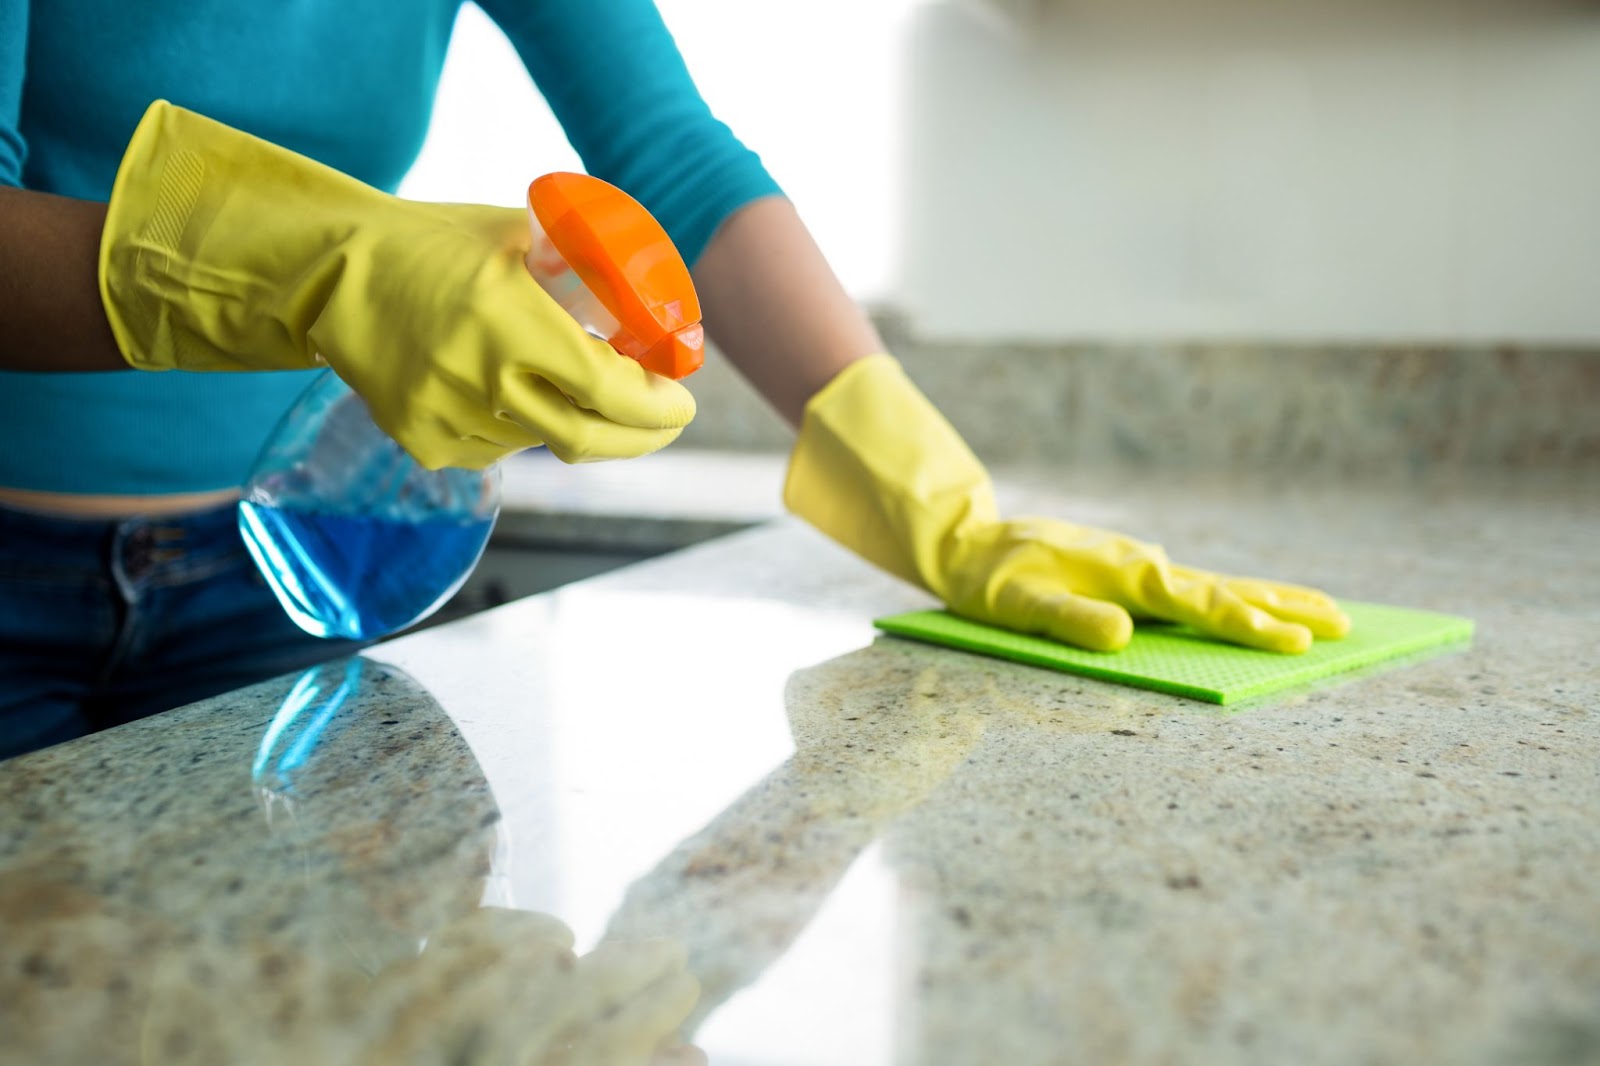 A person wearing gloves and scrubbing a bathtub during a deep cleaning session in a home